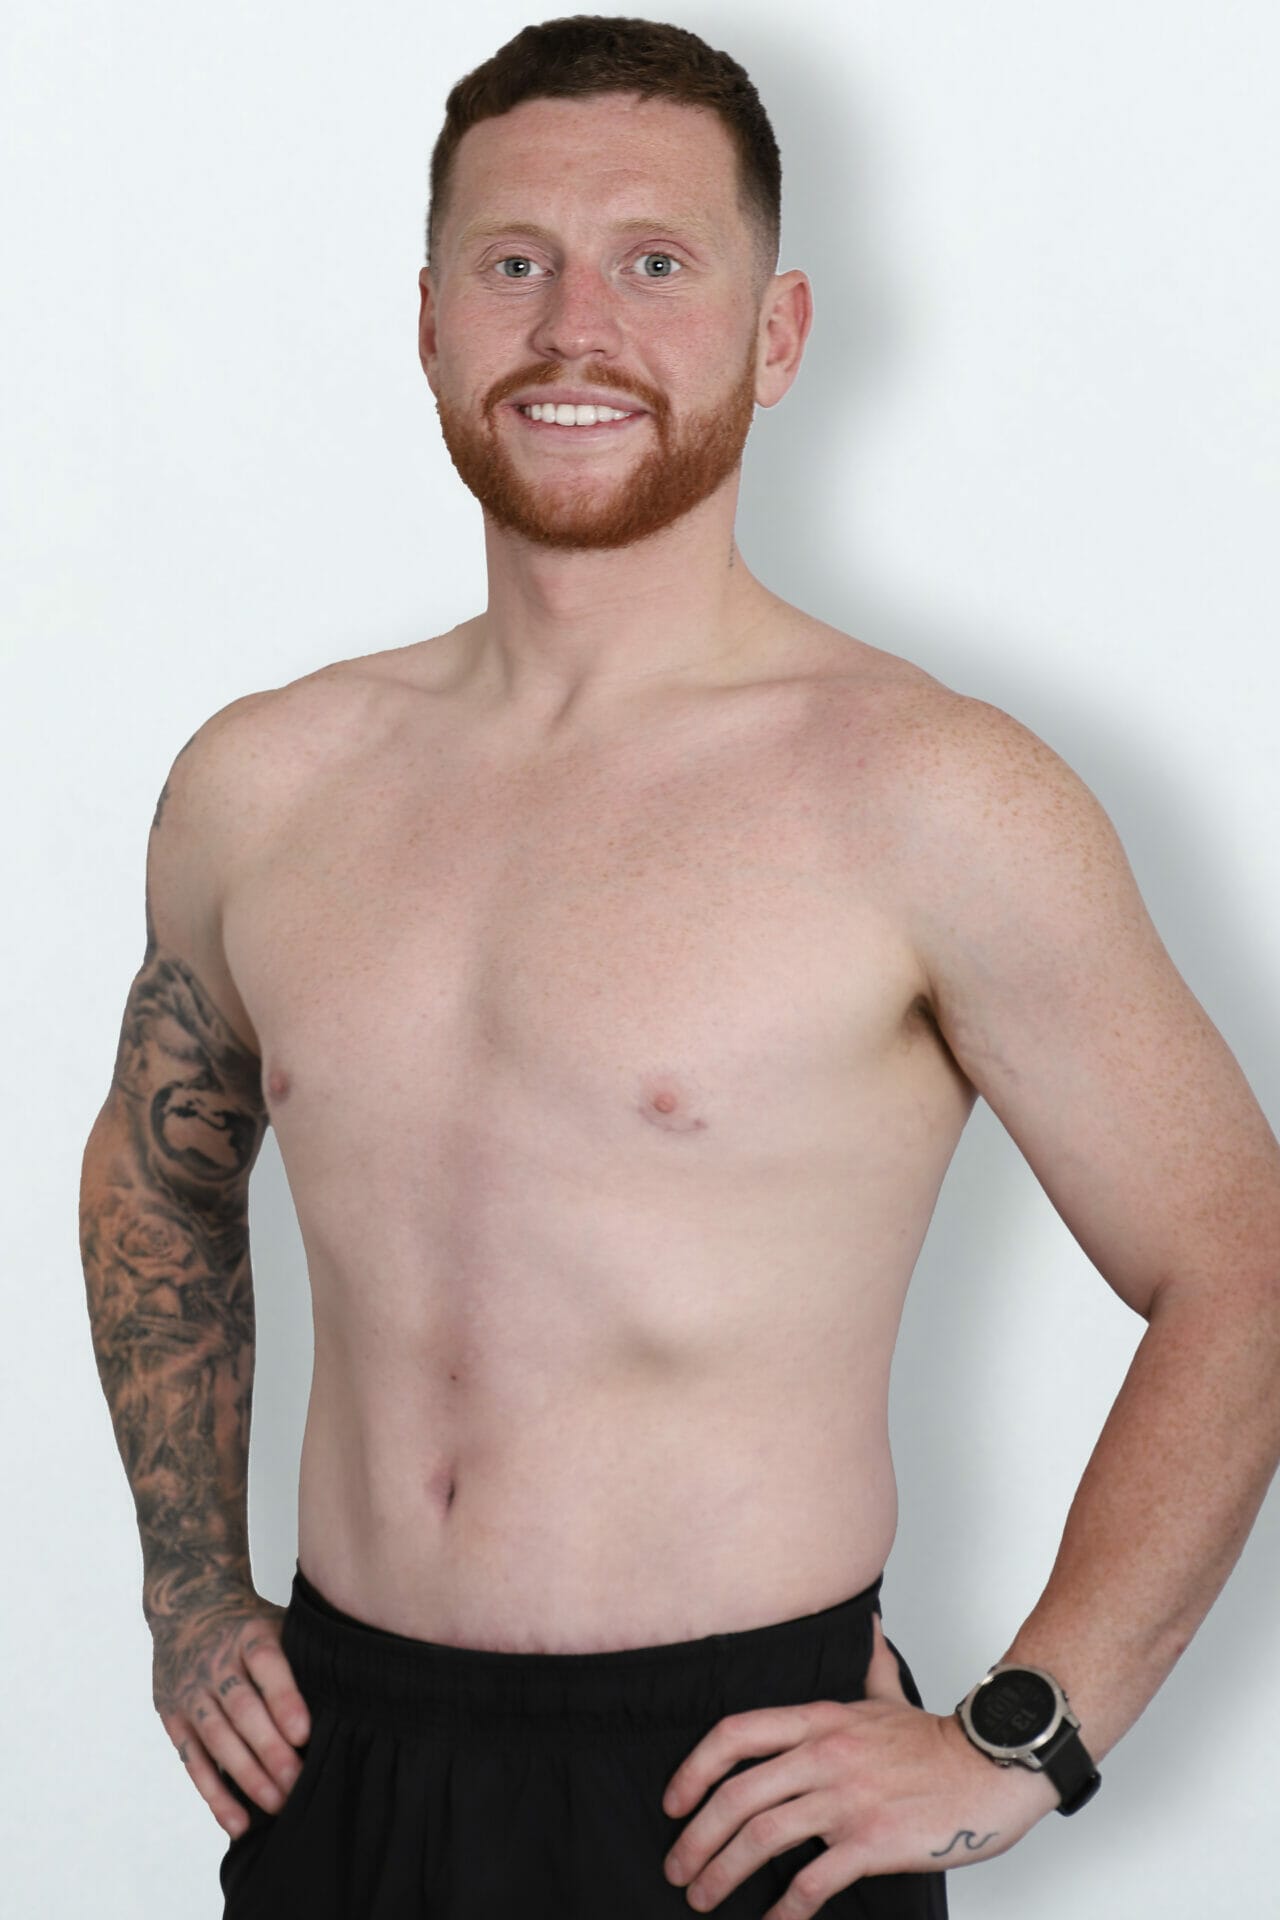 Ethan Payne 2 months after Circumferential Abdominoplasty surgery at Bella Vou